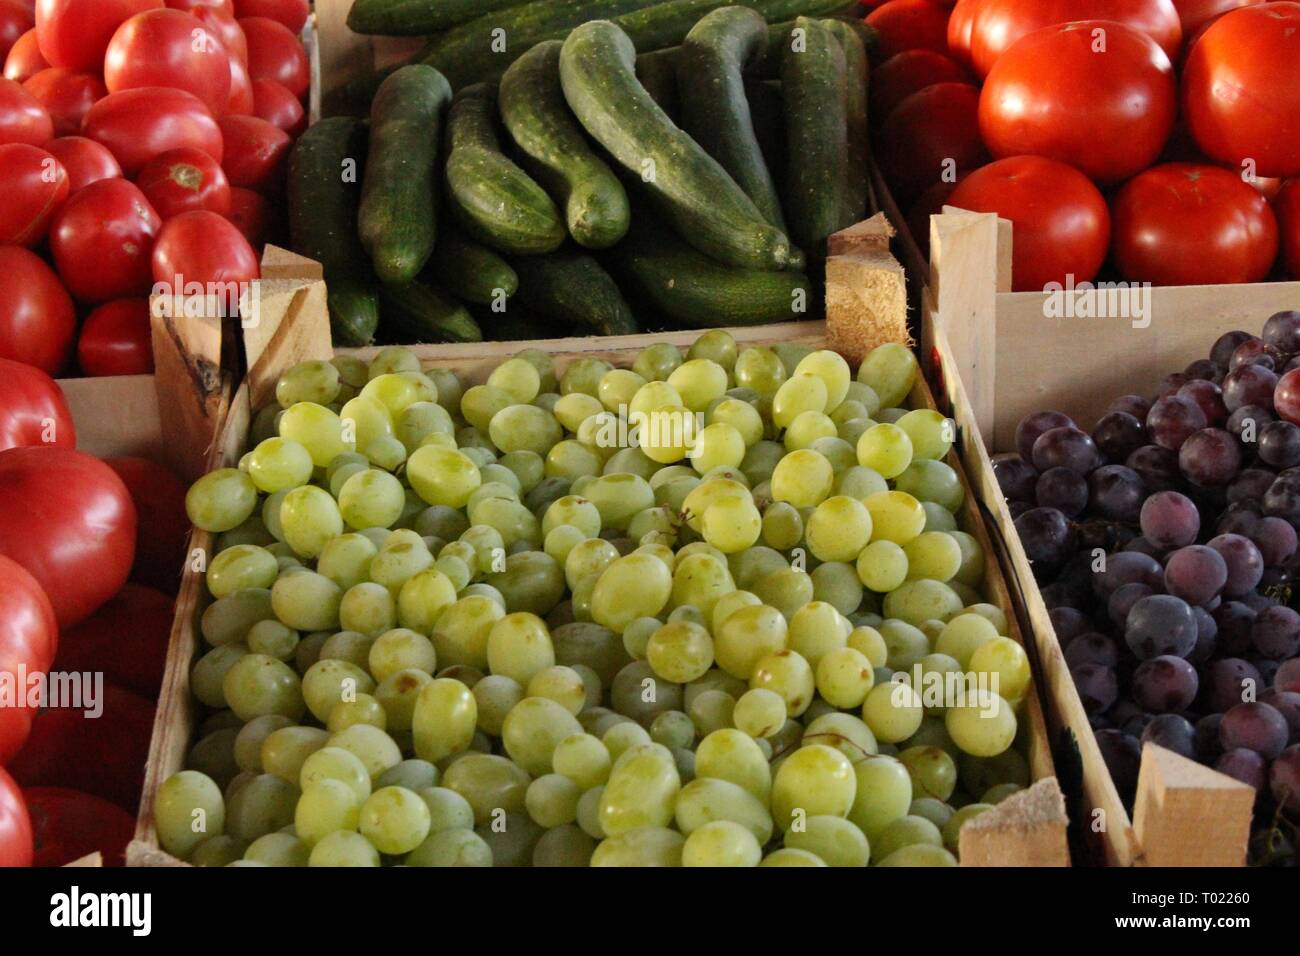 Grapes, tomatoes and cucumbers in crates at farmers whole food market Stock Photo